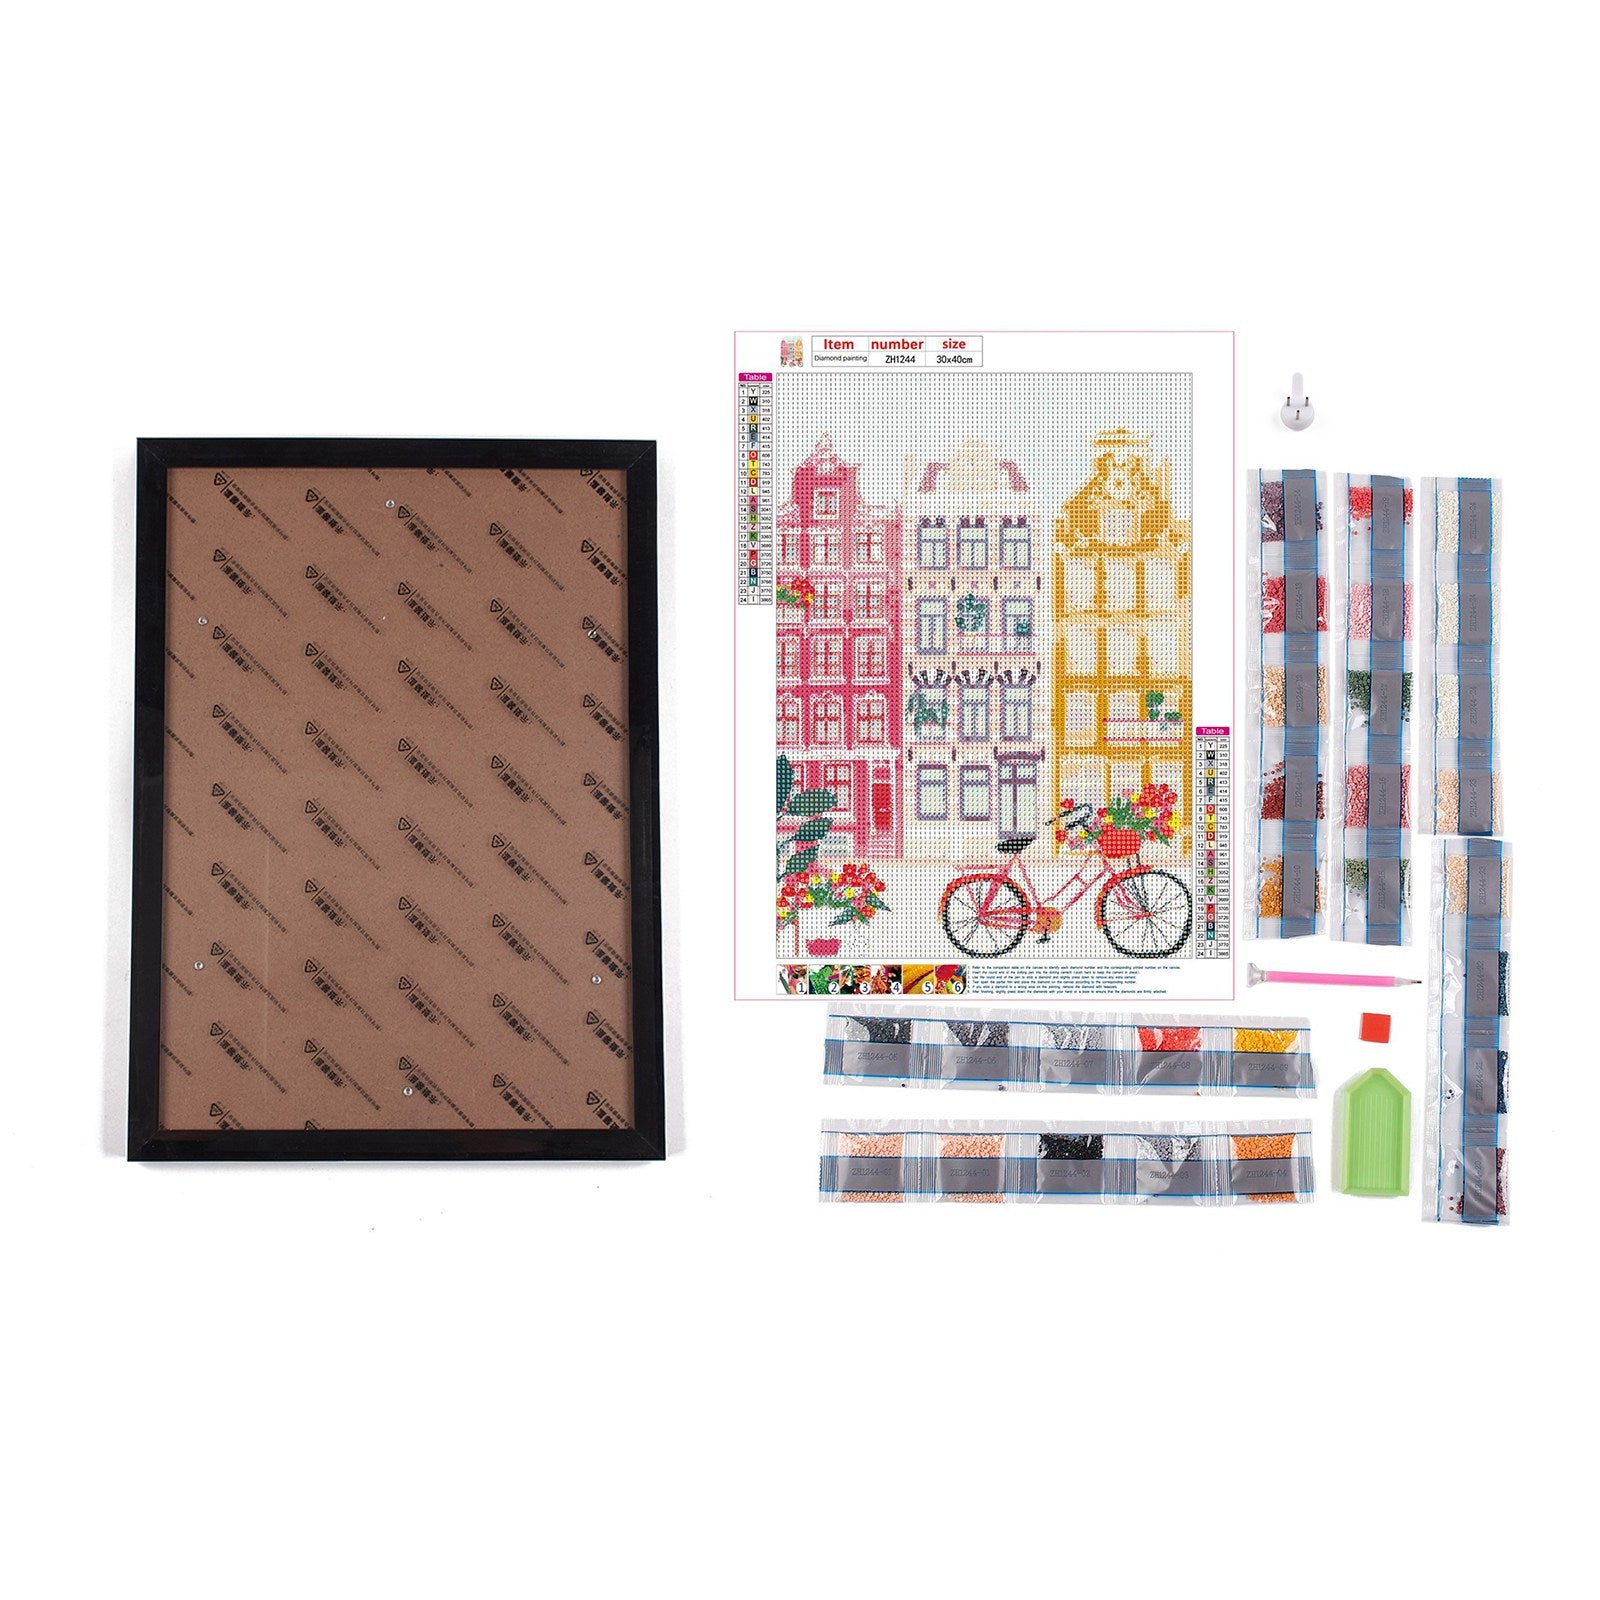 Globleland DIY 5D Amsterdam City Canvas Diamond Painting Kits, with Resin Rhinestones, Sticky Pen, Tray Plate, Glue Clay, Frame and Drawing Pin, for Home Wall Decor Full Drill Diamond Art Gift, Bloemenmarkt, 399x297x3mm, 2Set/Pack